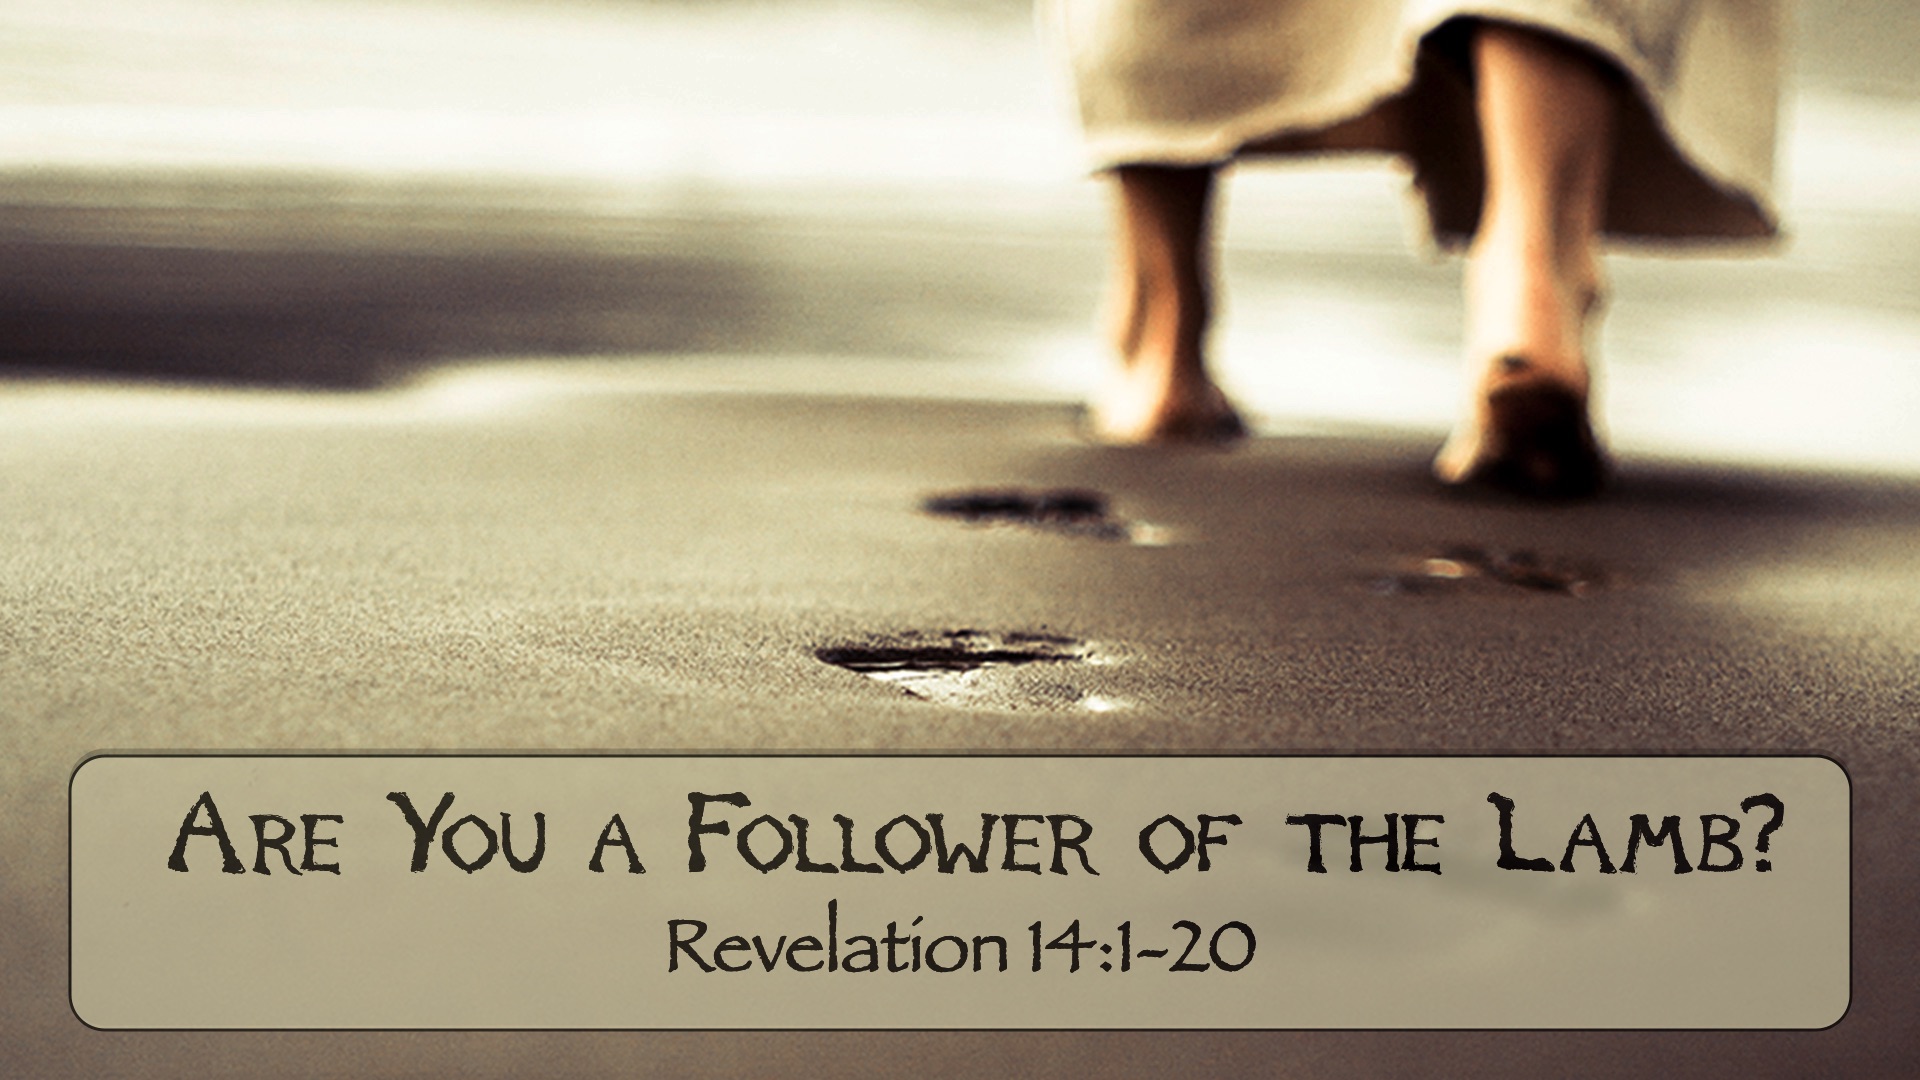 “The Book of Revelation: Are You a Follower of the Lamb?”